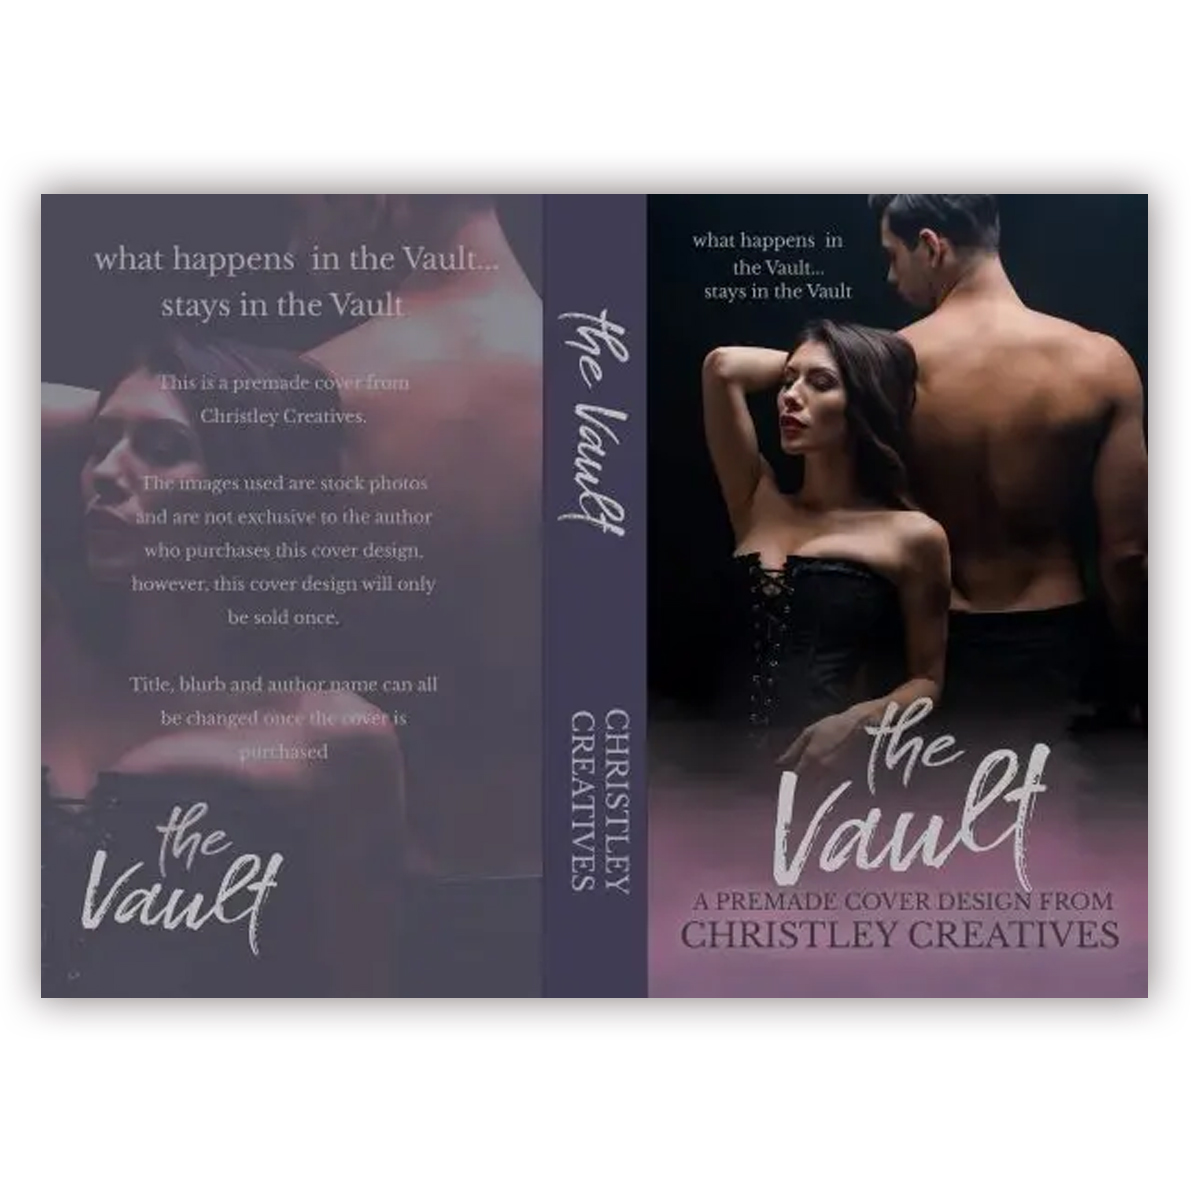 The Vault - Premade Contemporary Romance Book Cover from Christley Creatives